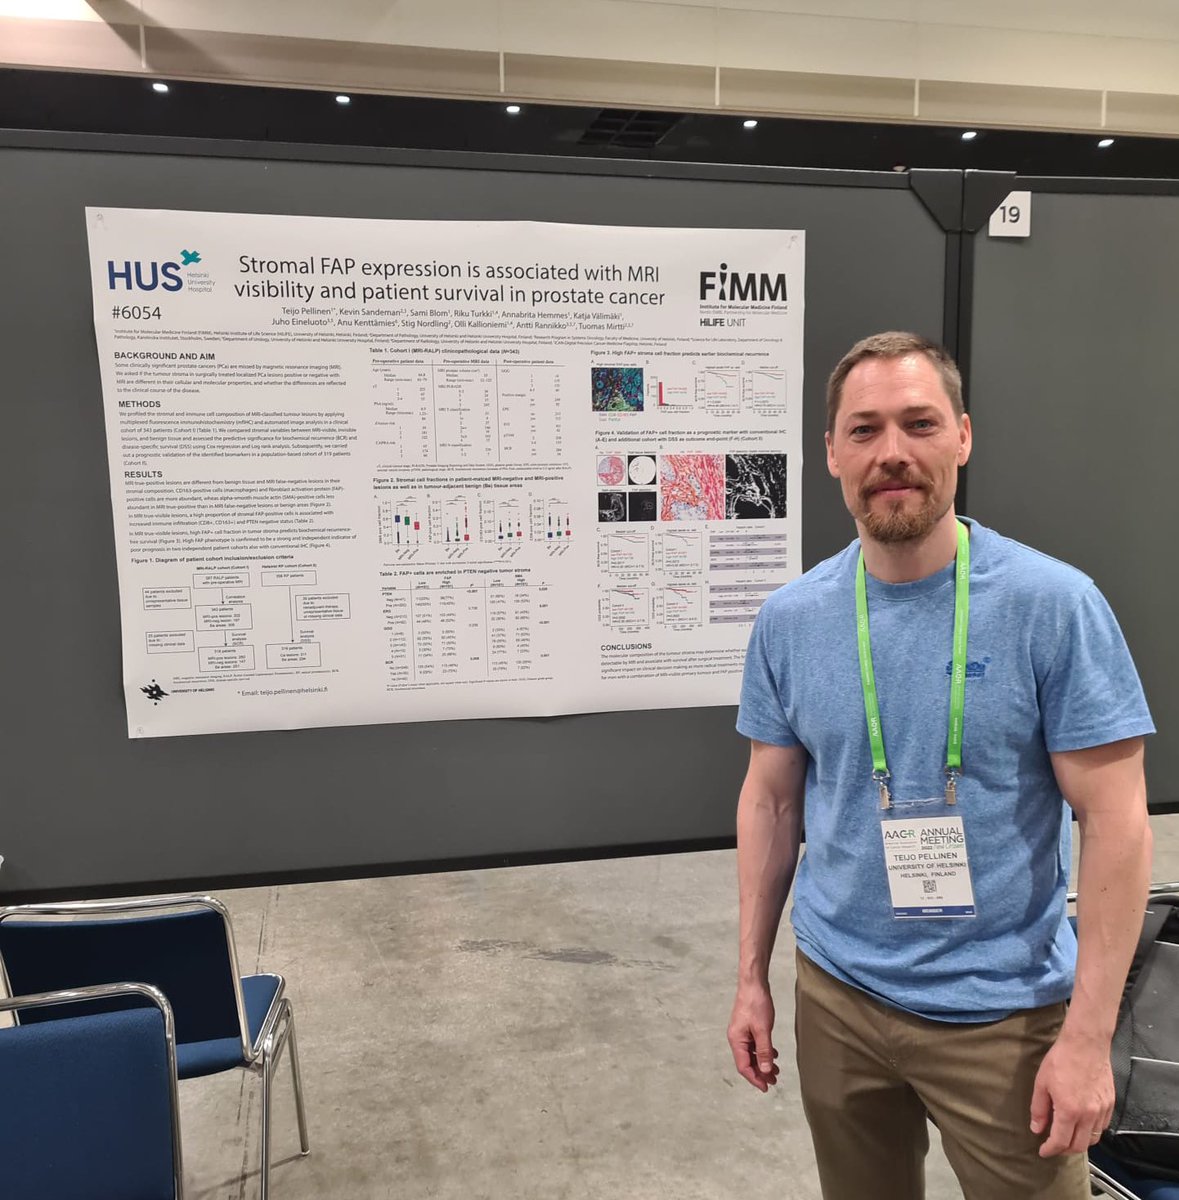 Today Teijo Pellinen presented our very recently published findings on the importance of stromal FAP in MRI-detected prostate cancer. #AACR22